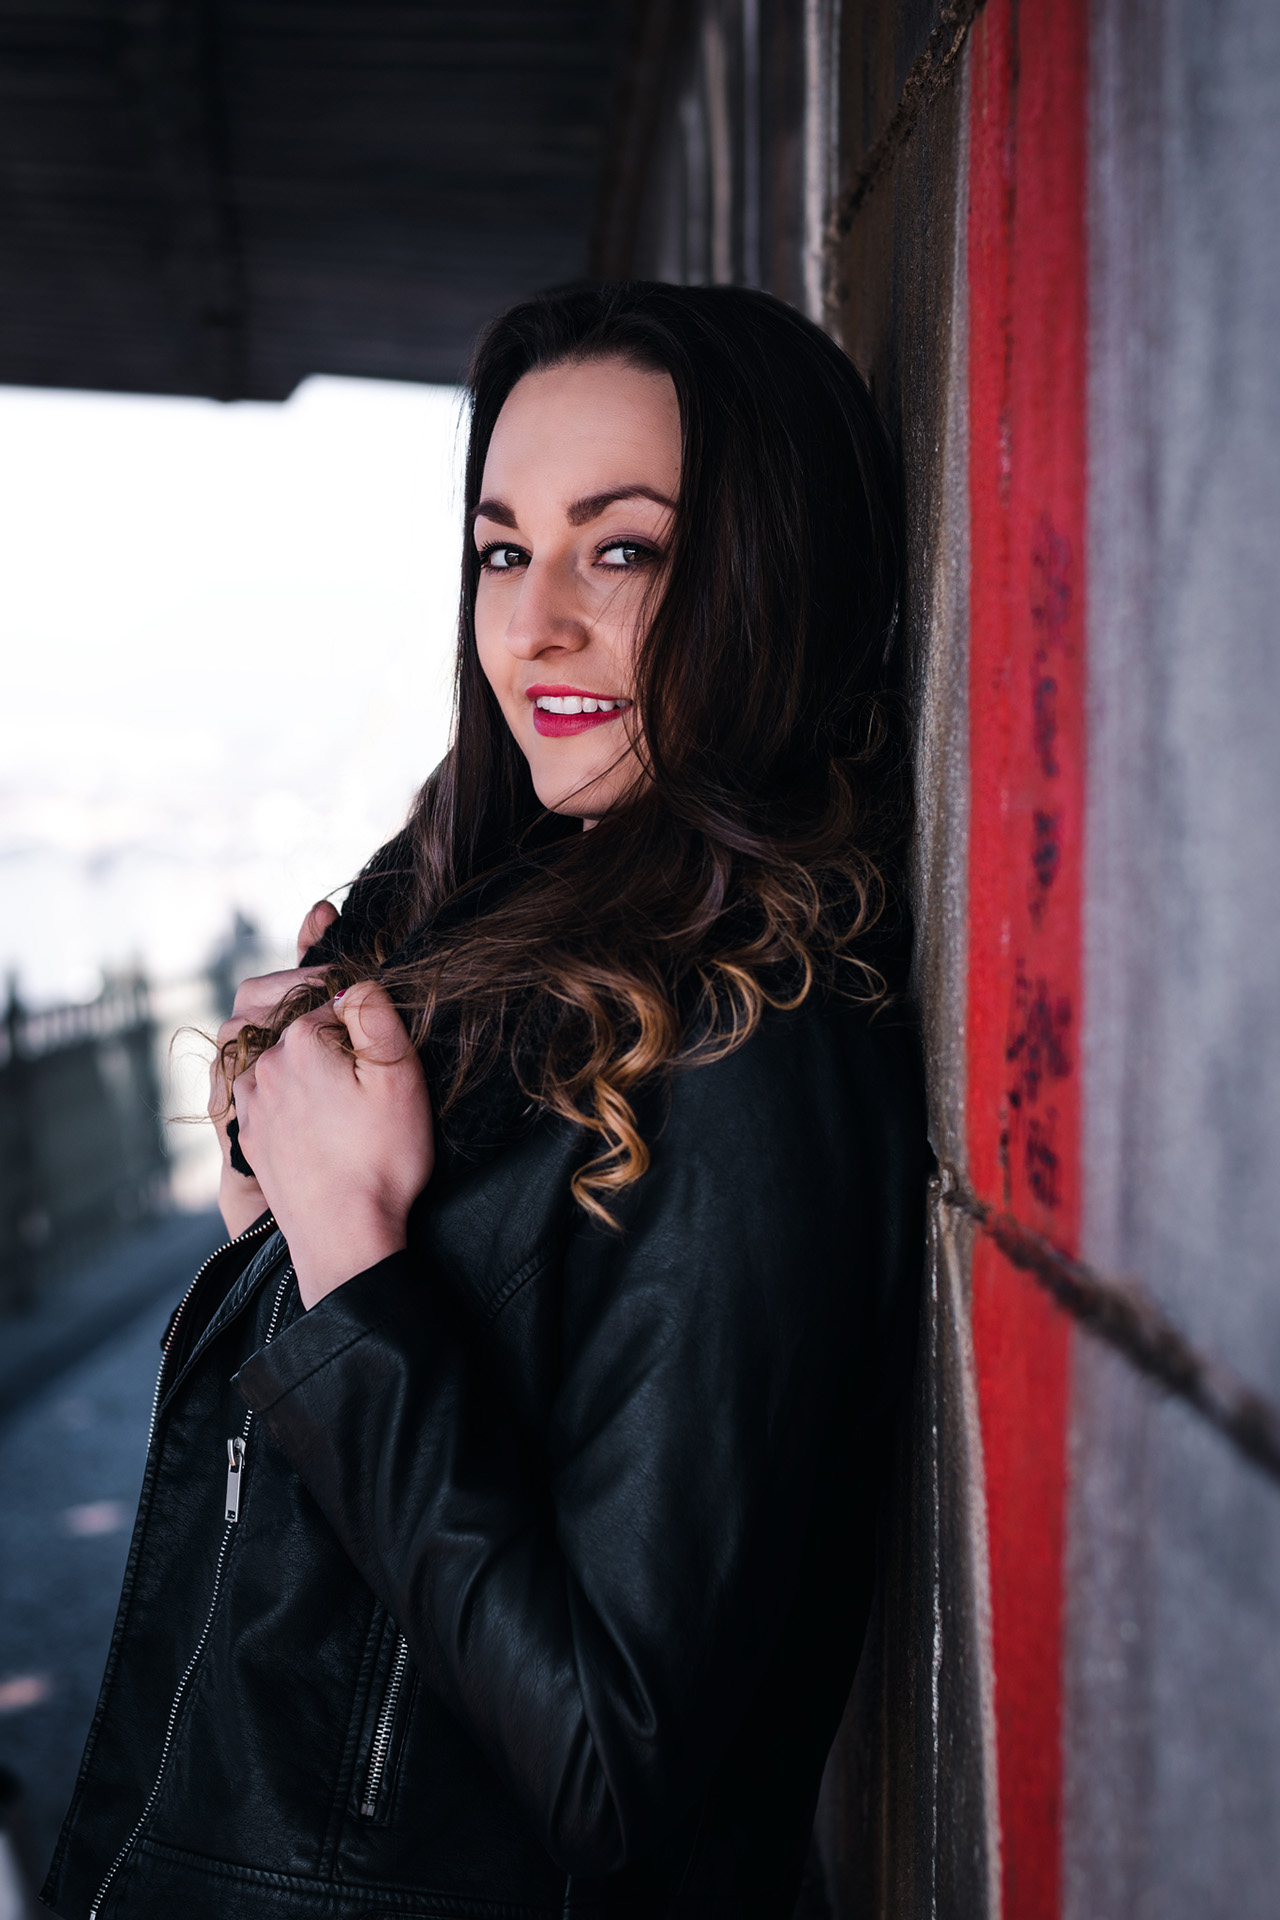 Photo of a female model in black leather jacket leaning against a graffity wall.